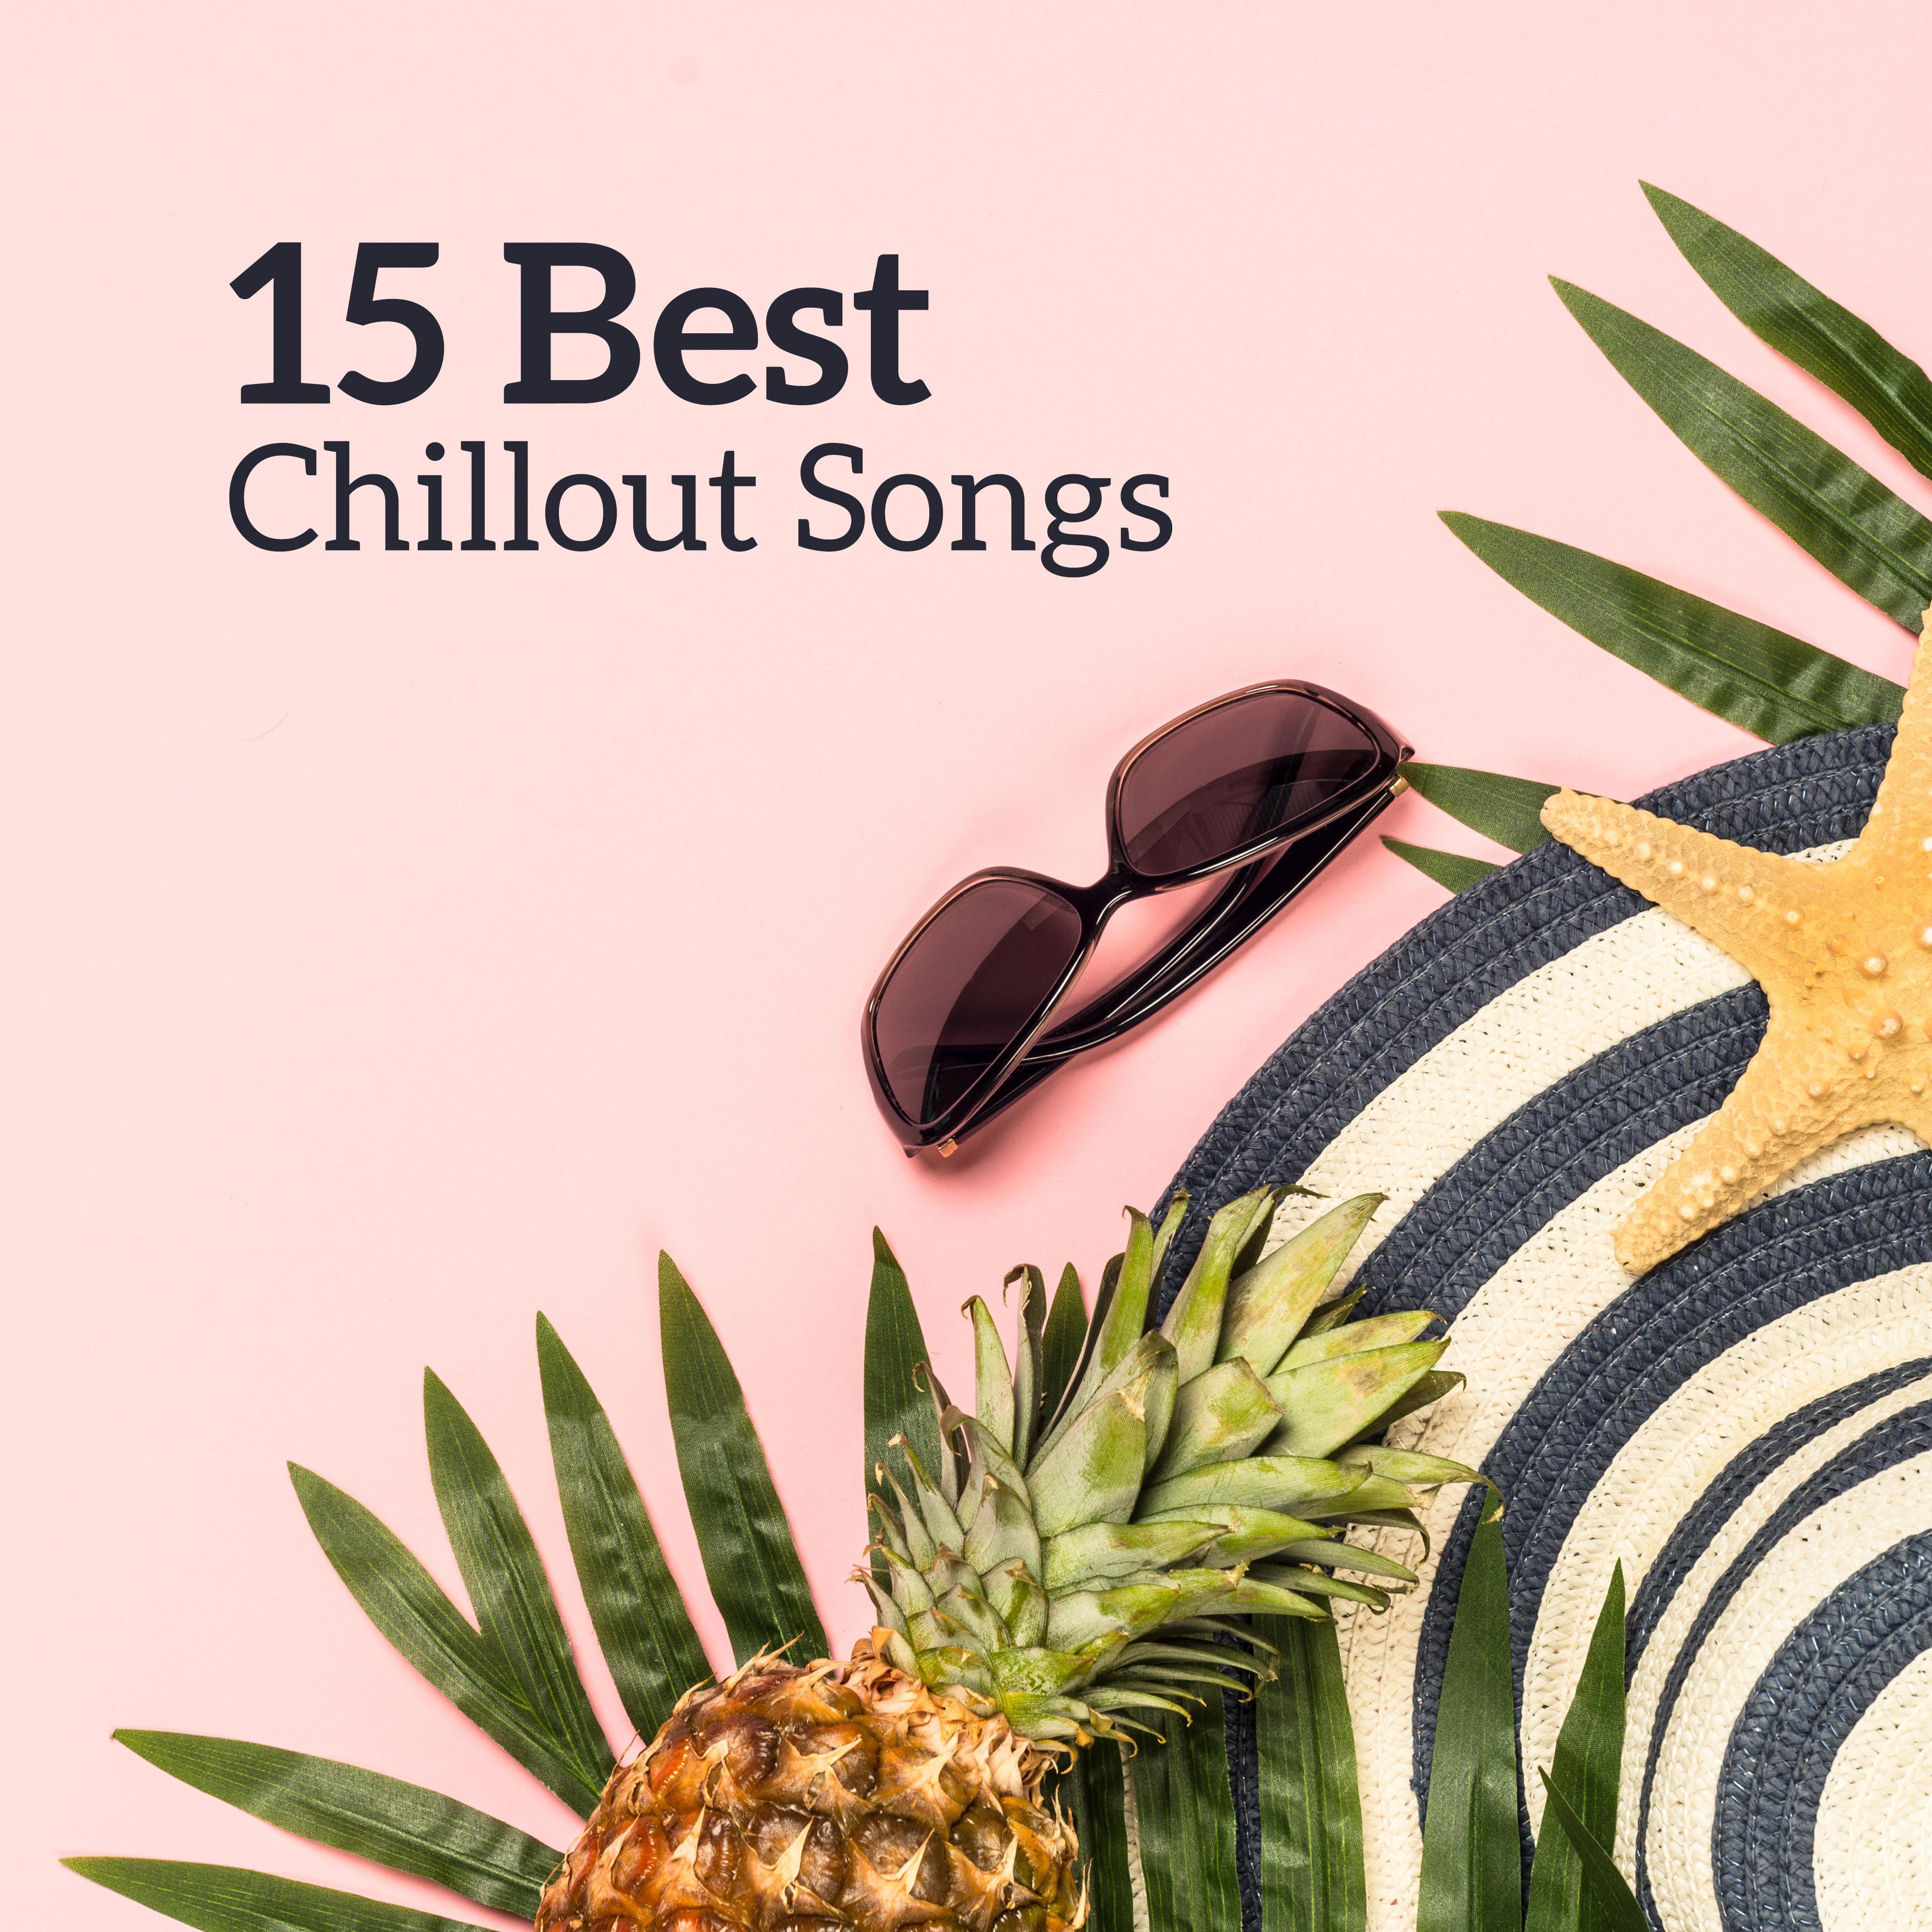 15 Best Chillout Songs – Ibiza Chill Out, Music Zone, Summer Music 2019, Inner Harmony, Relaxing Music Therapy, Beach Chillout